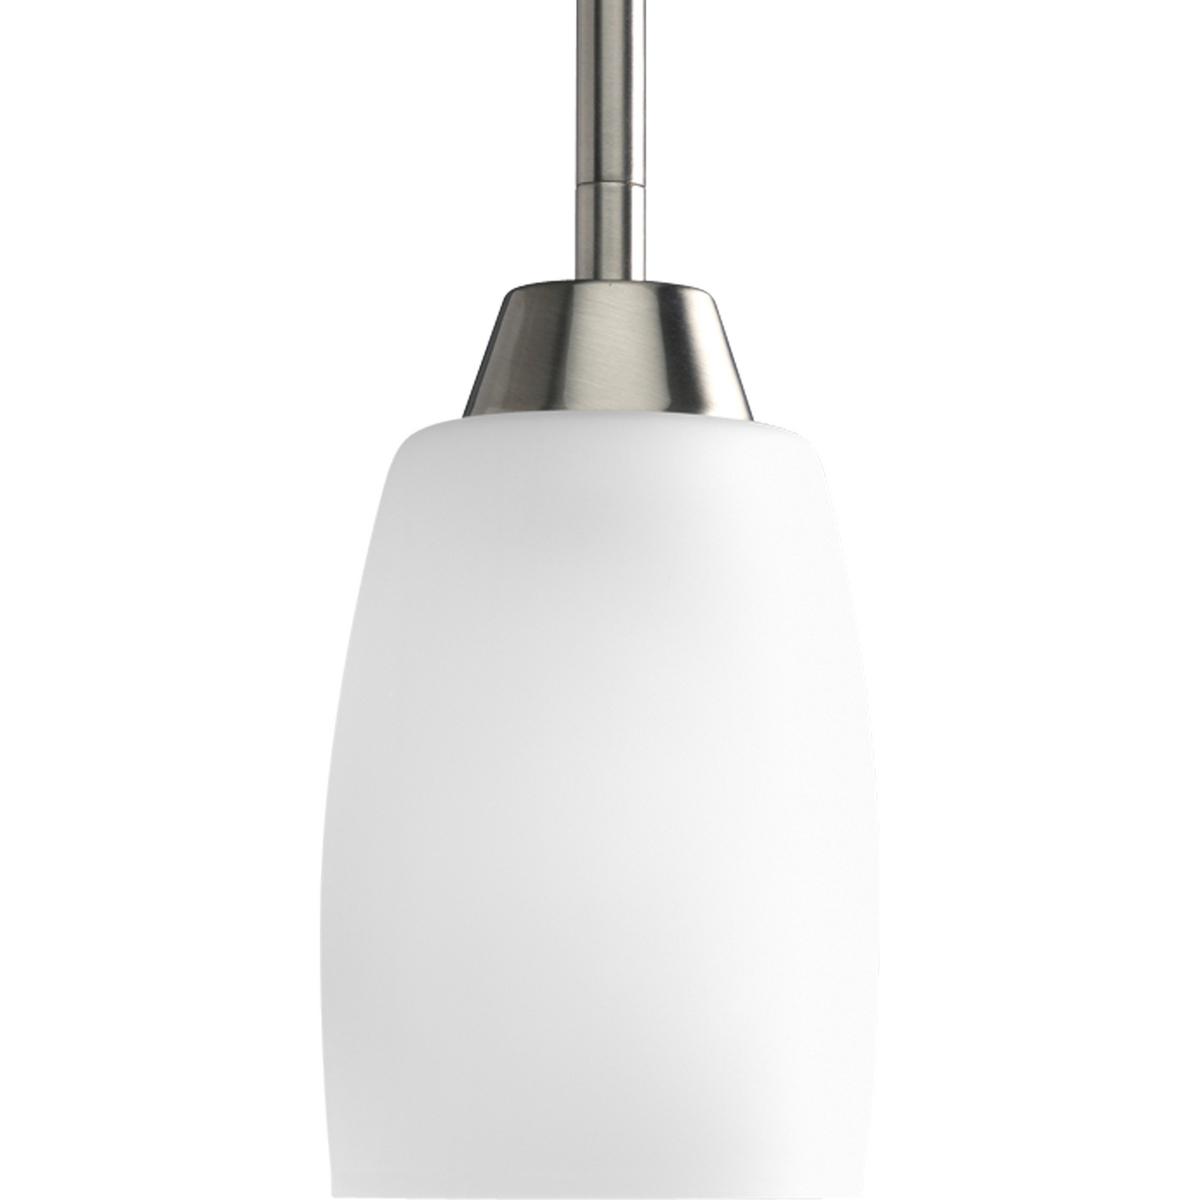 Hubbell P5108-09 The Wisten Collection features sweeping arcs framing elegant, tapered glass shades. Cool and modern with a casual flair, Wisten provides a signature look to any room. One-light mini-pendant with etched glass in a Brushed Nickel finish.  ; Sweeping arms fr